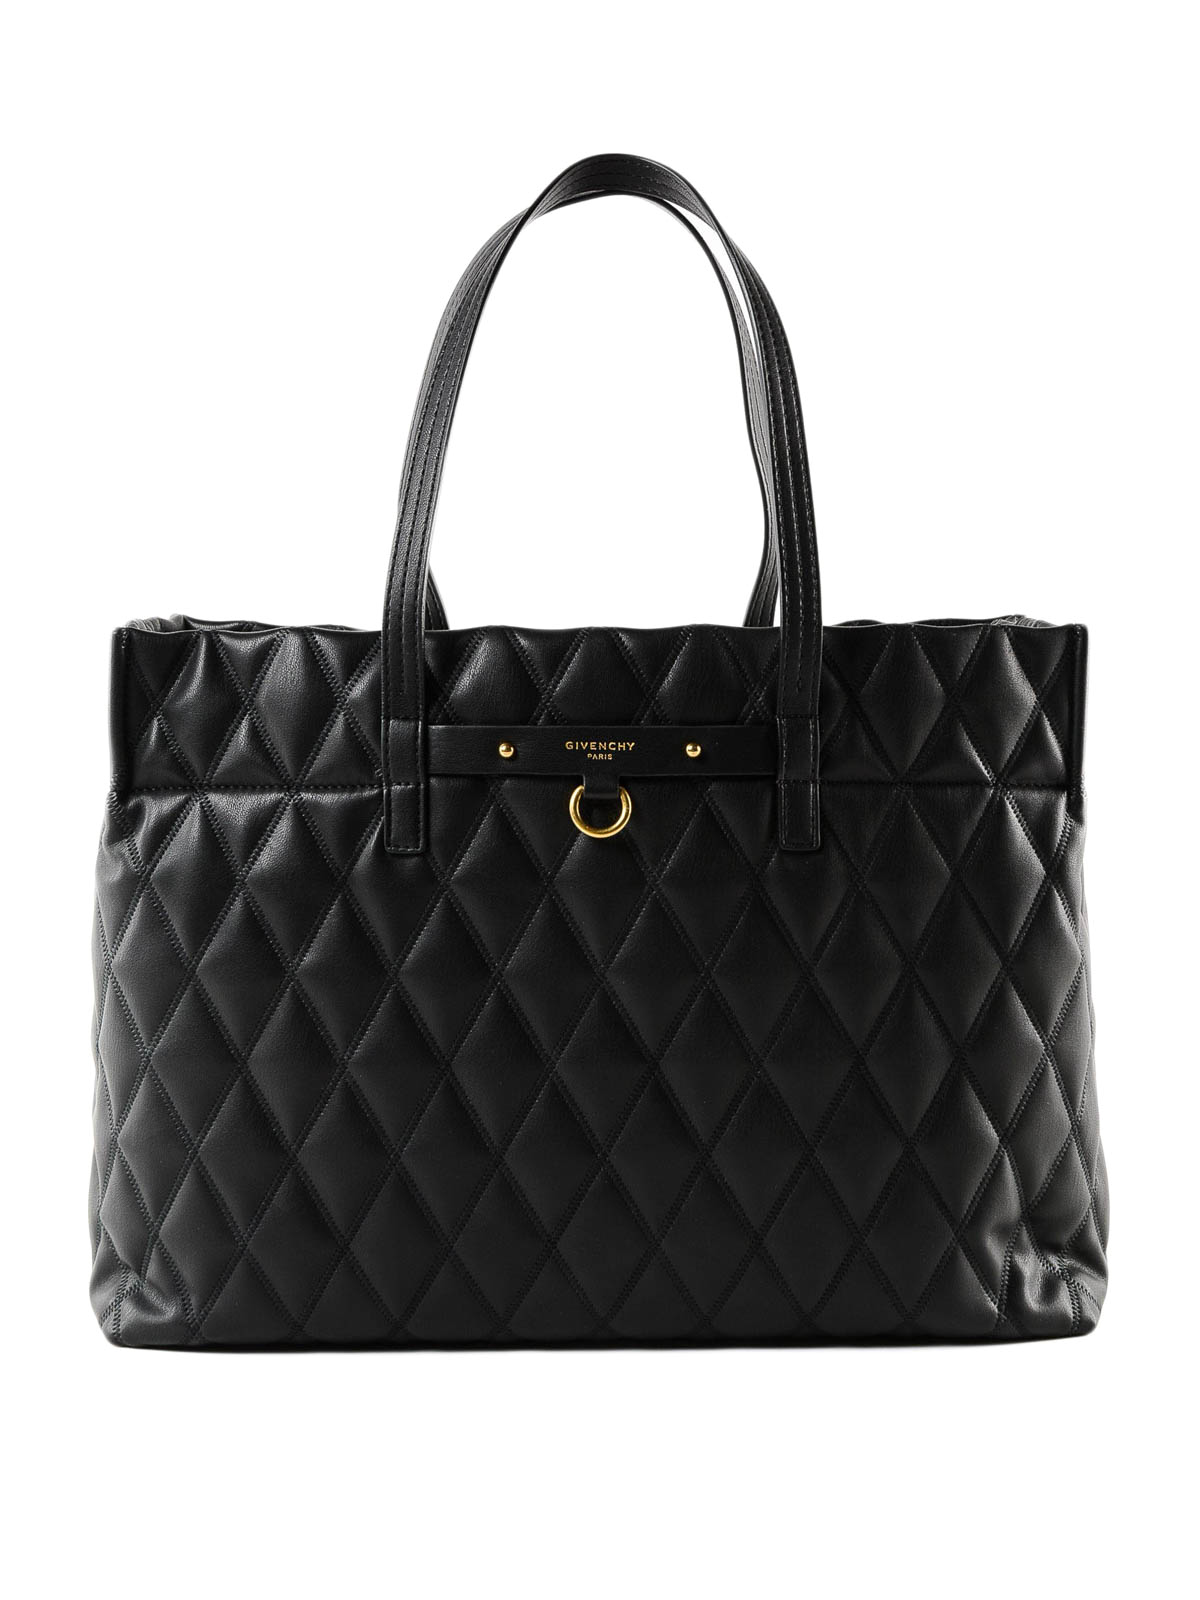 Givenchy - Duo quilted black tote bag - totes bags - BB506RB0CK001